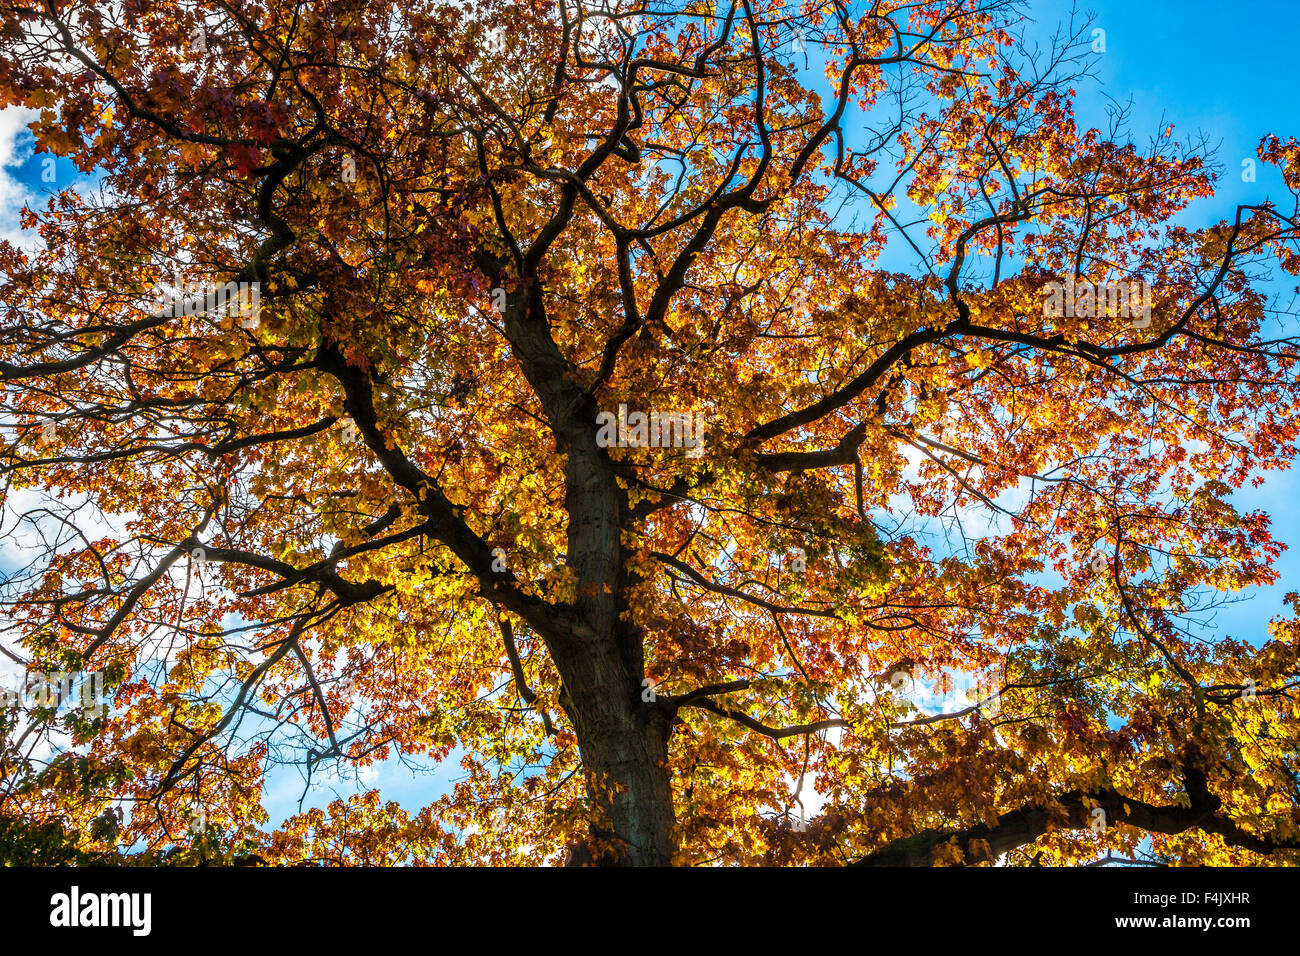 Looking up through the backlit autumn leaves of a tree against a blue sky. Stock Photo